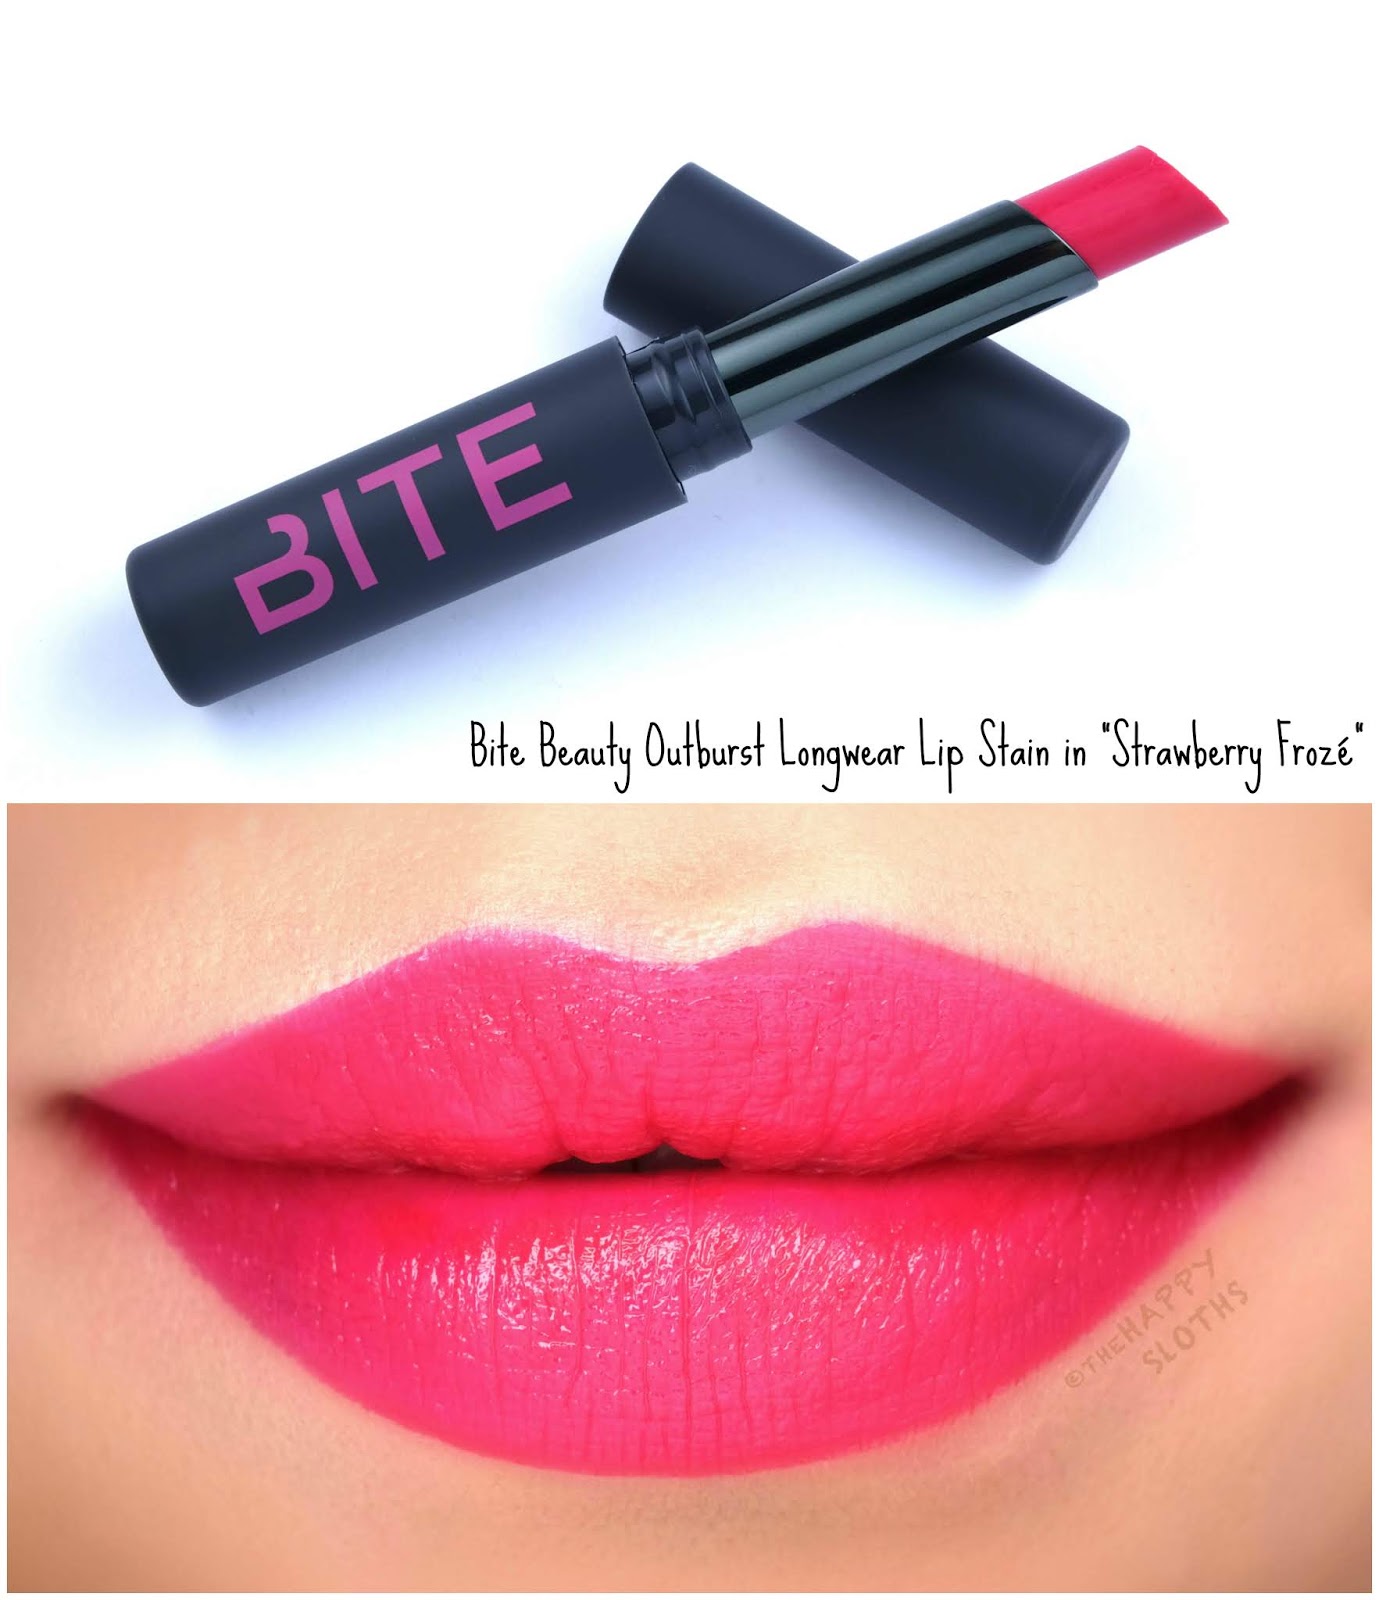 Bite Beauty | Outburst Longwear Lip Stain in "Strawberry Frozé": Review and Swatches